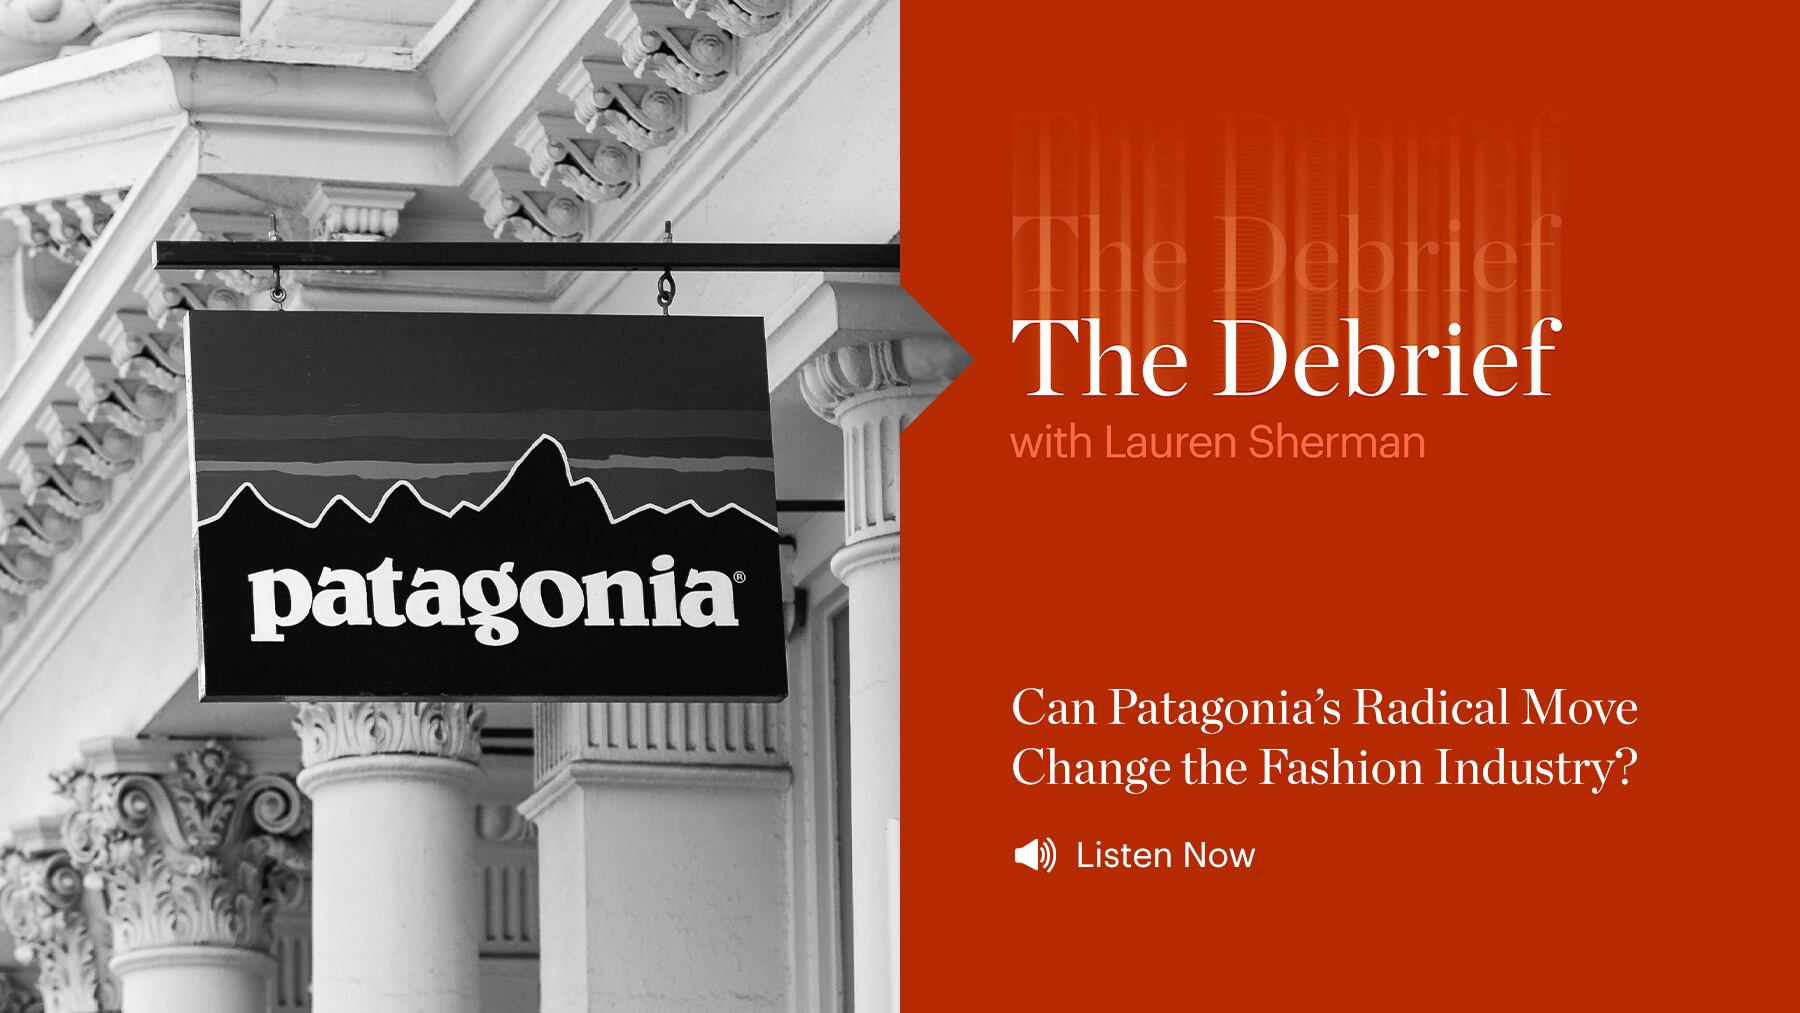 Can Patagonia’s Radical Move Change the Fashion Industry?